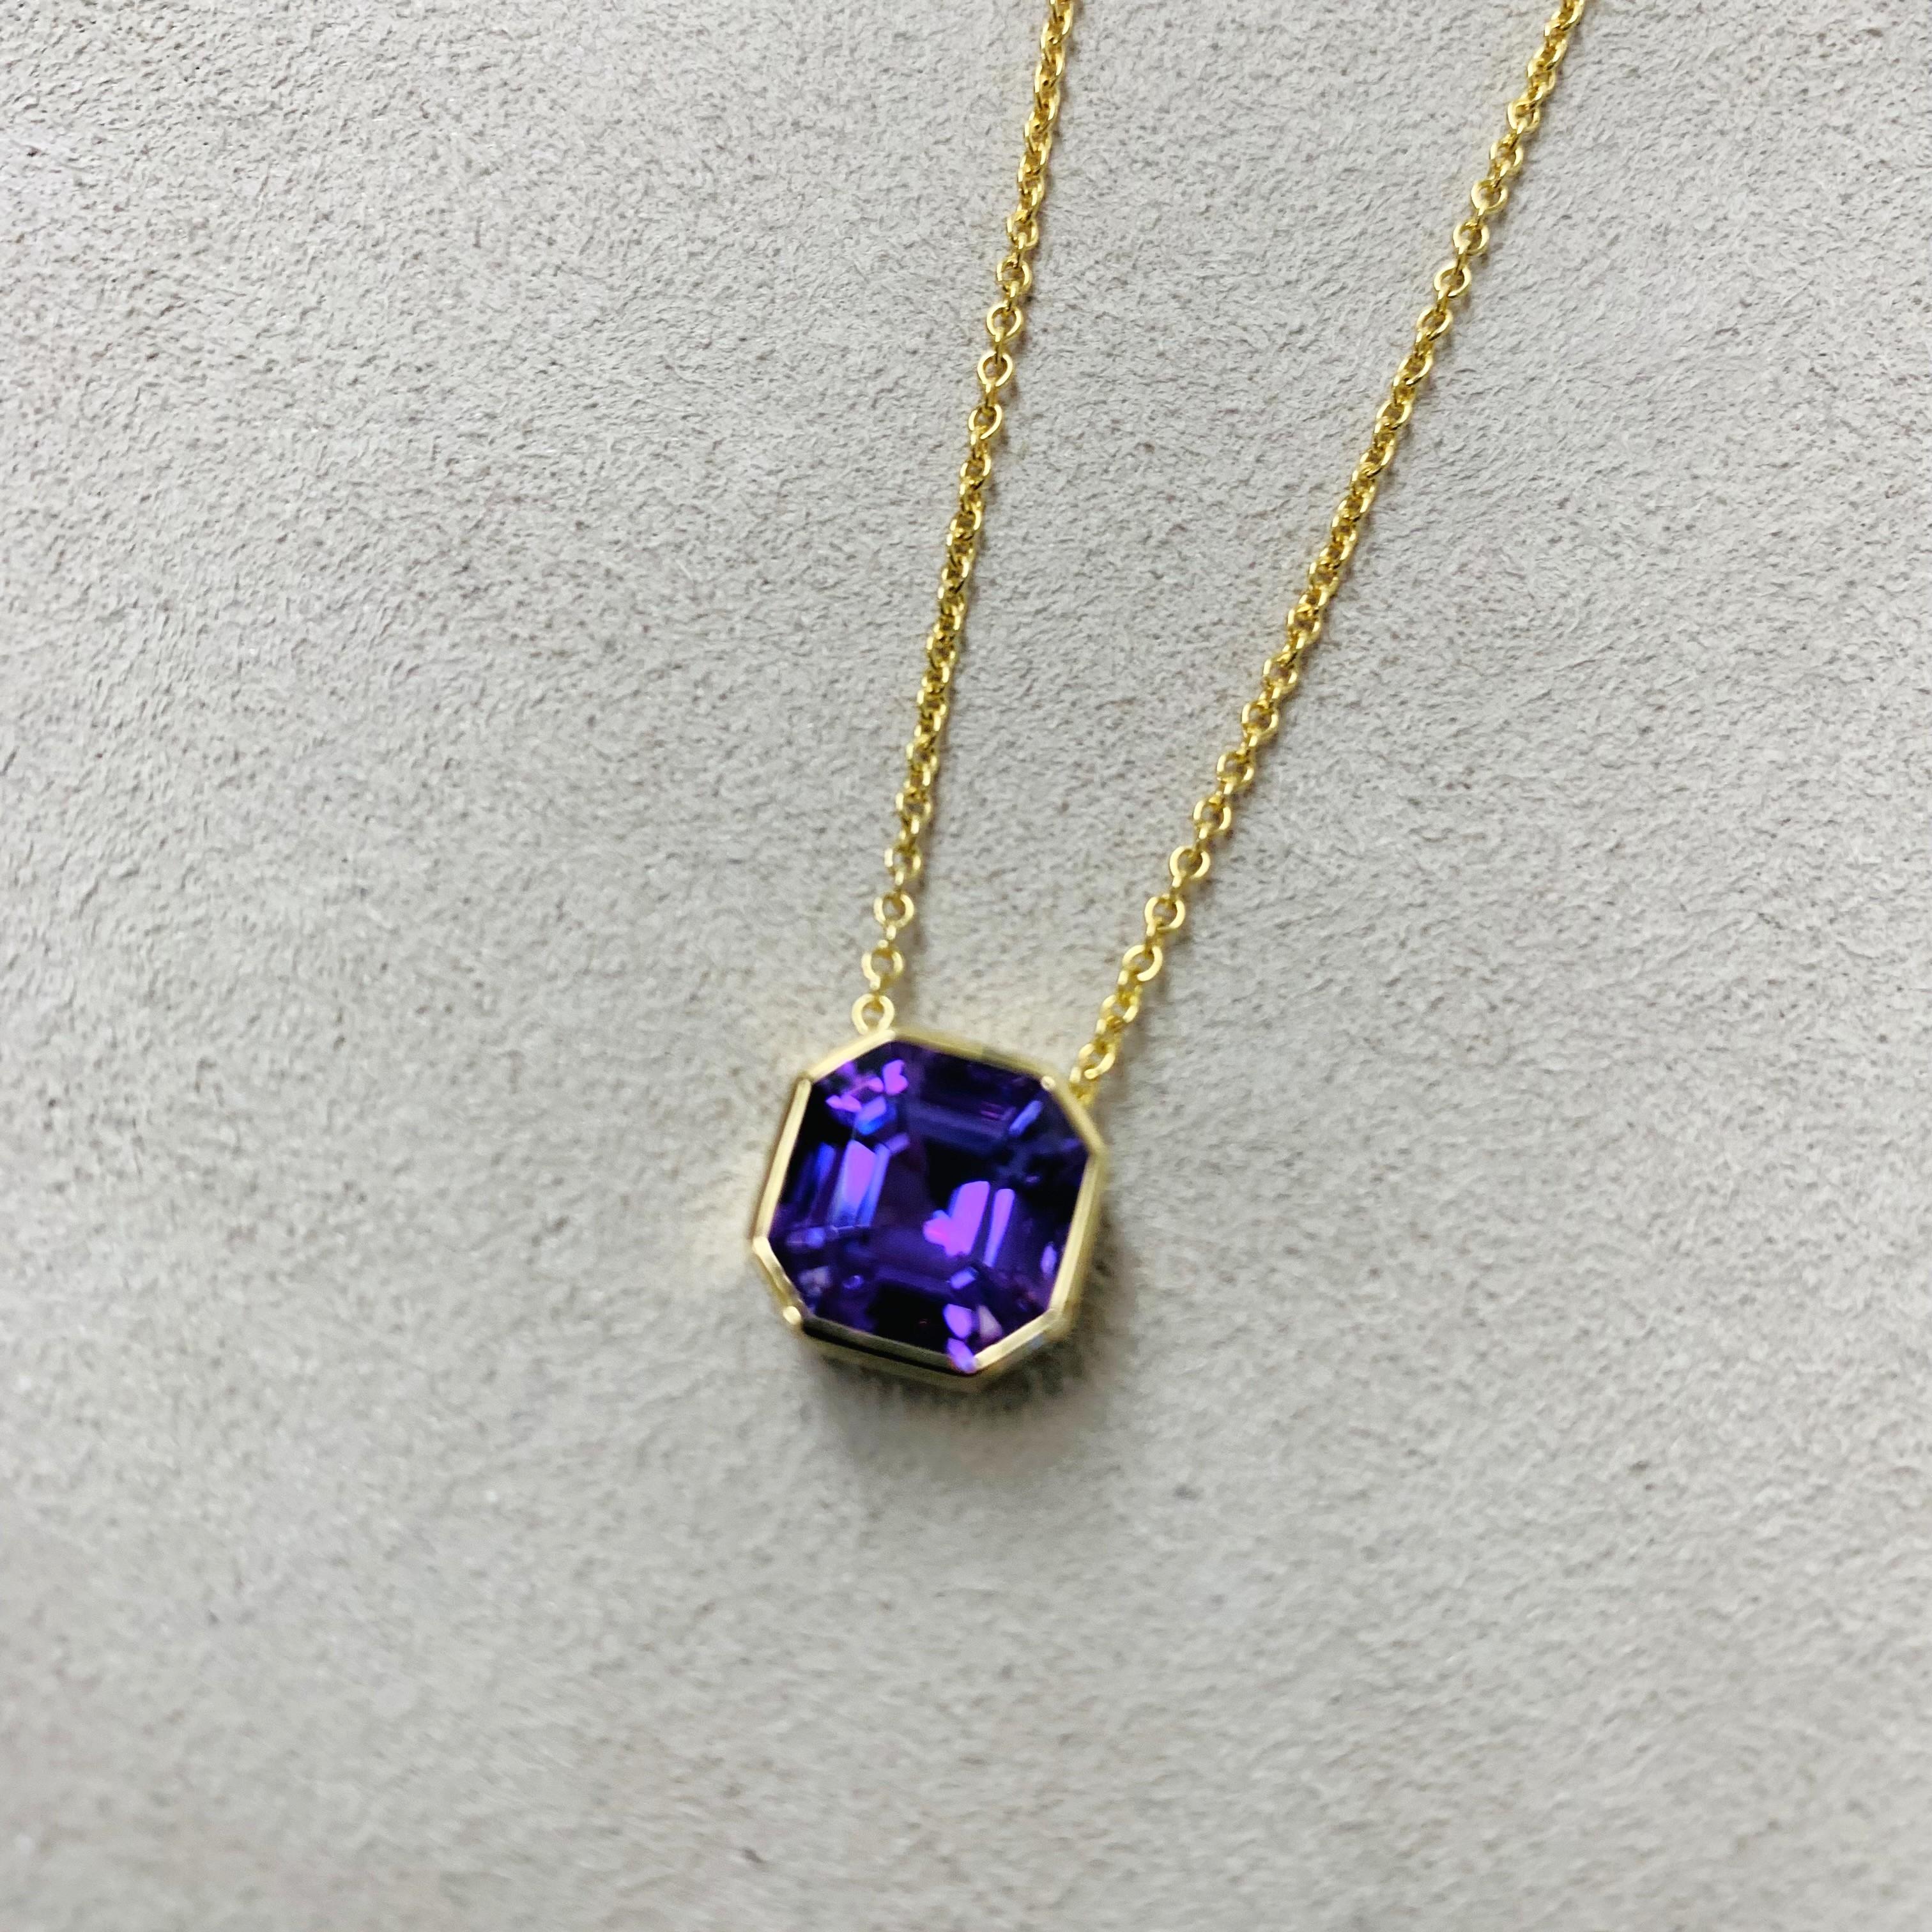 Created in 18 karat yellow gold
Amethyst 4 carats approx.
18 inch necklace with loops at 16 and 17 inch
Lobster lock

 About the Designers ~ Dharmesh & Namrata

Drawing inspiration from little things, Dharmesh & Namrata Kothari have created an